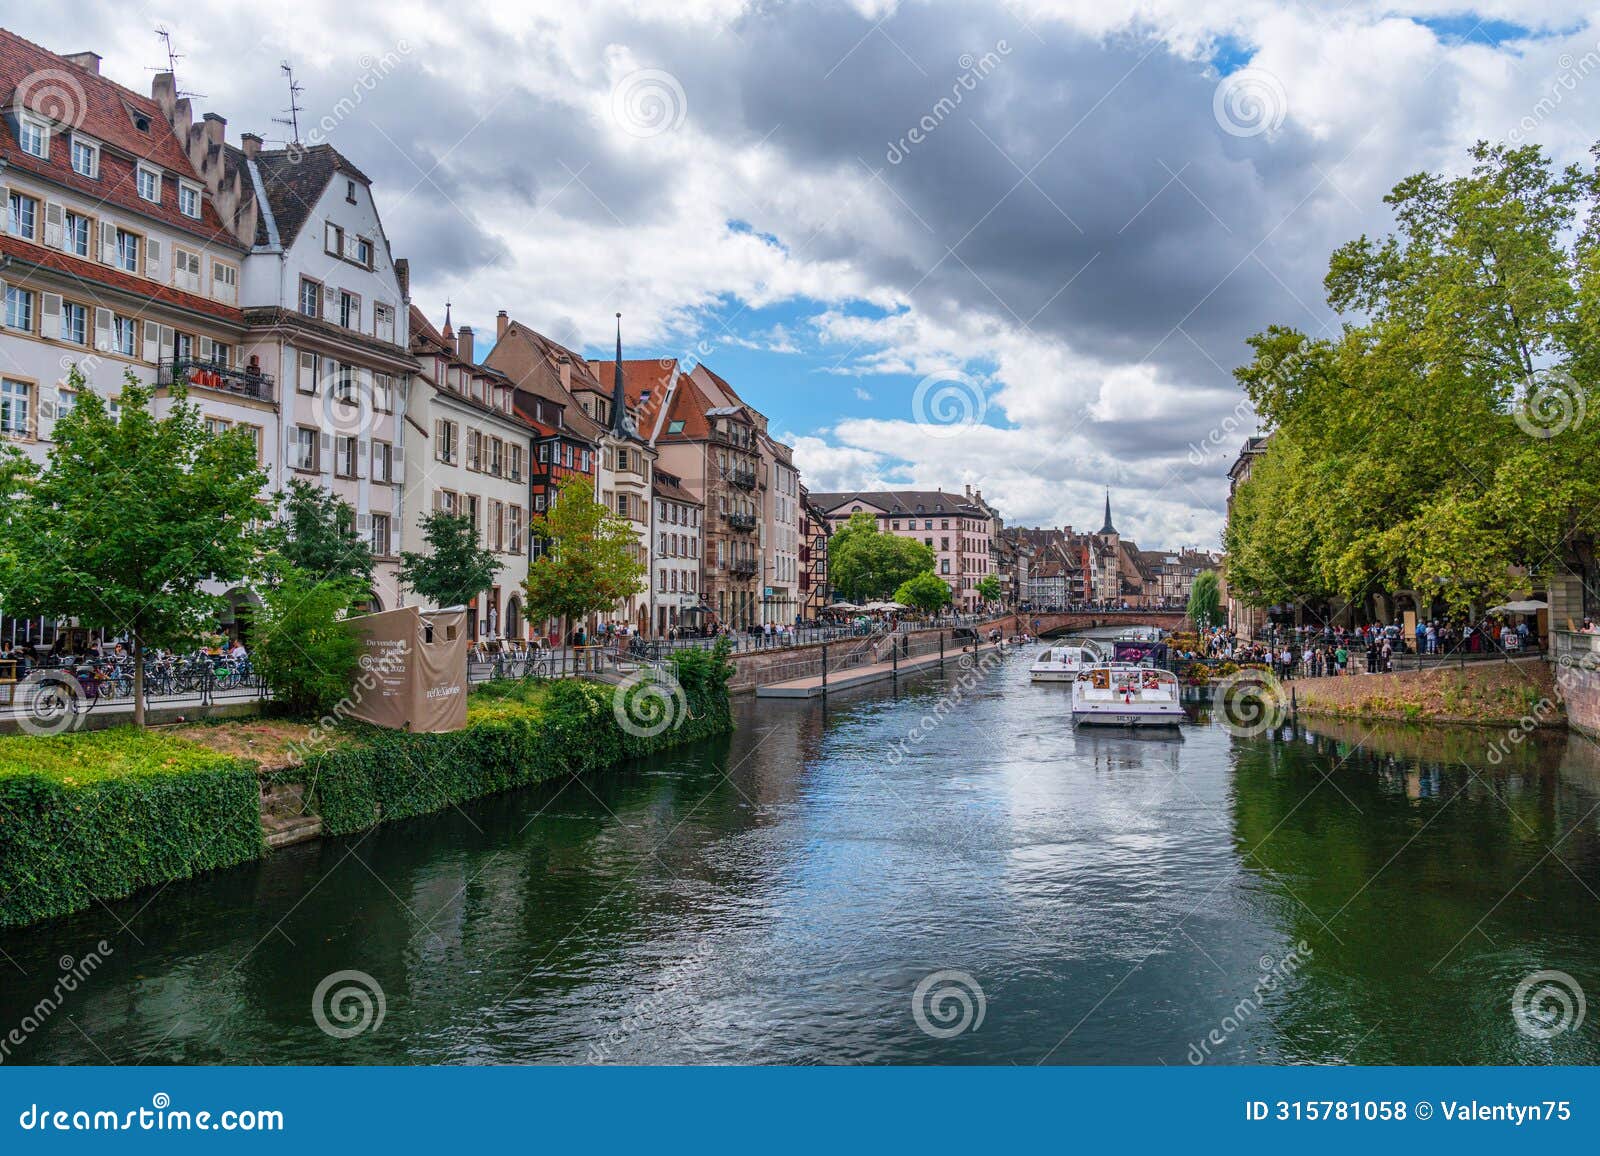 le petite france, the most picturesque district of old strasbourg. houses with reflection in waters of the ill channels